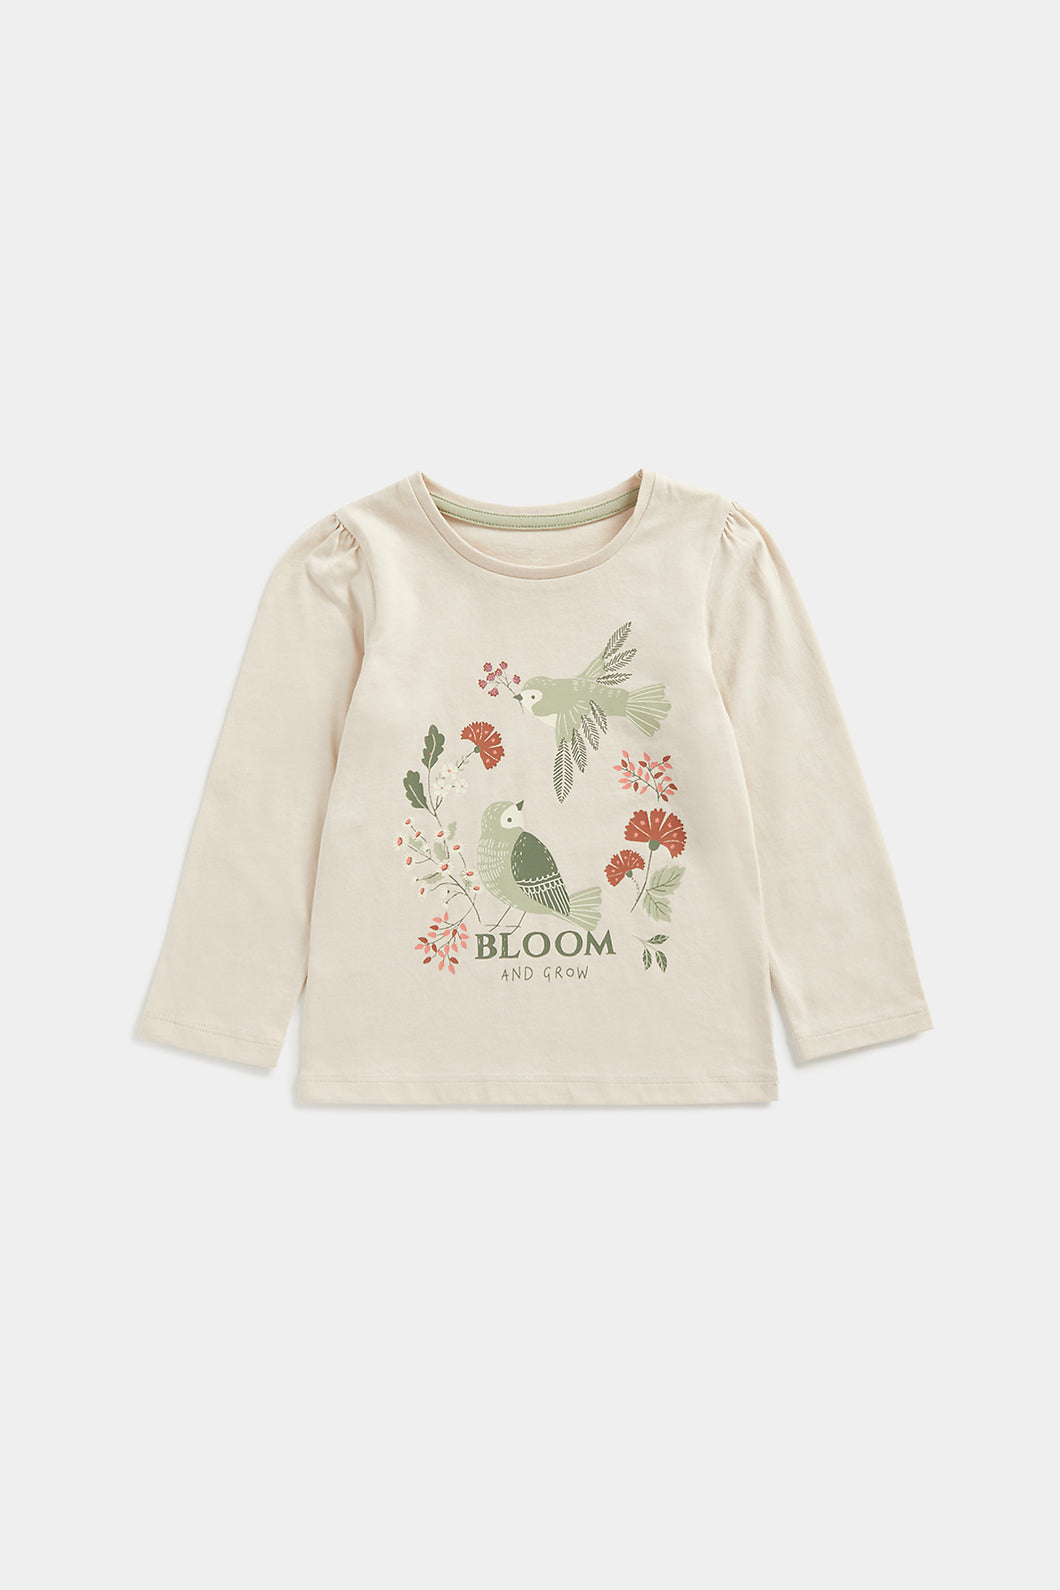 Mothercare Natural Bloom and Grow Long-Sleeved T-Shirt